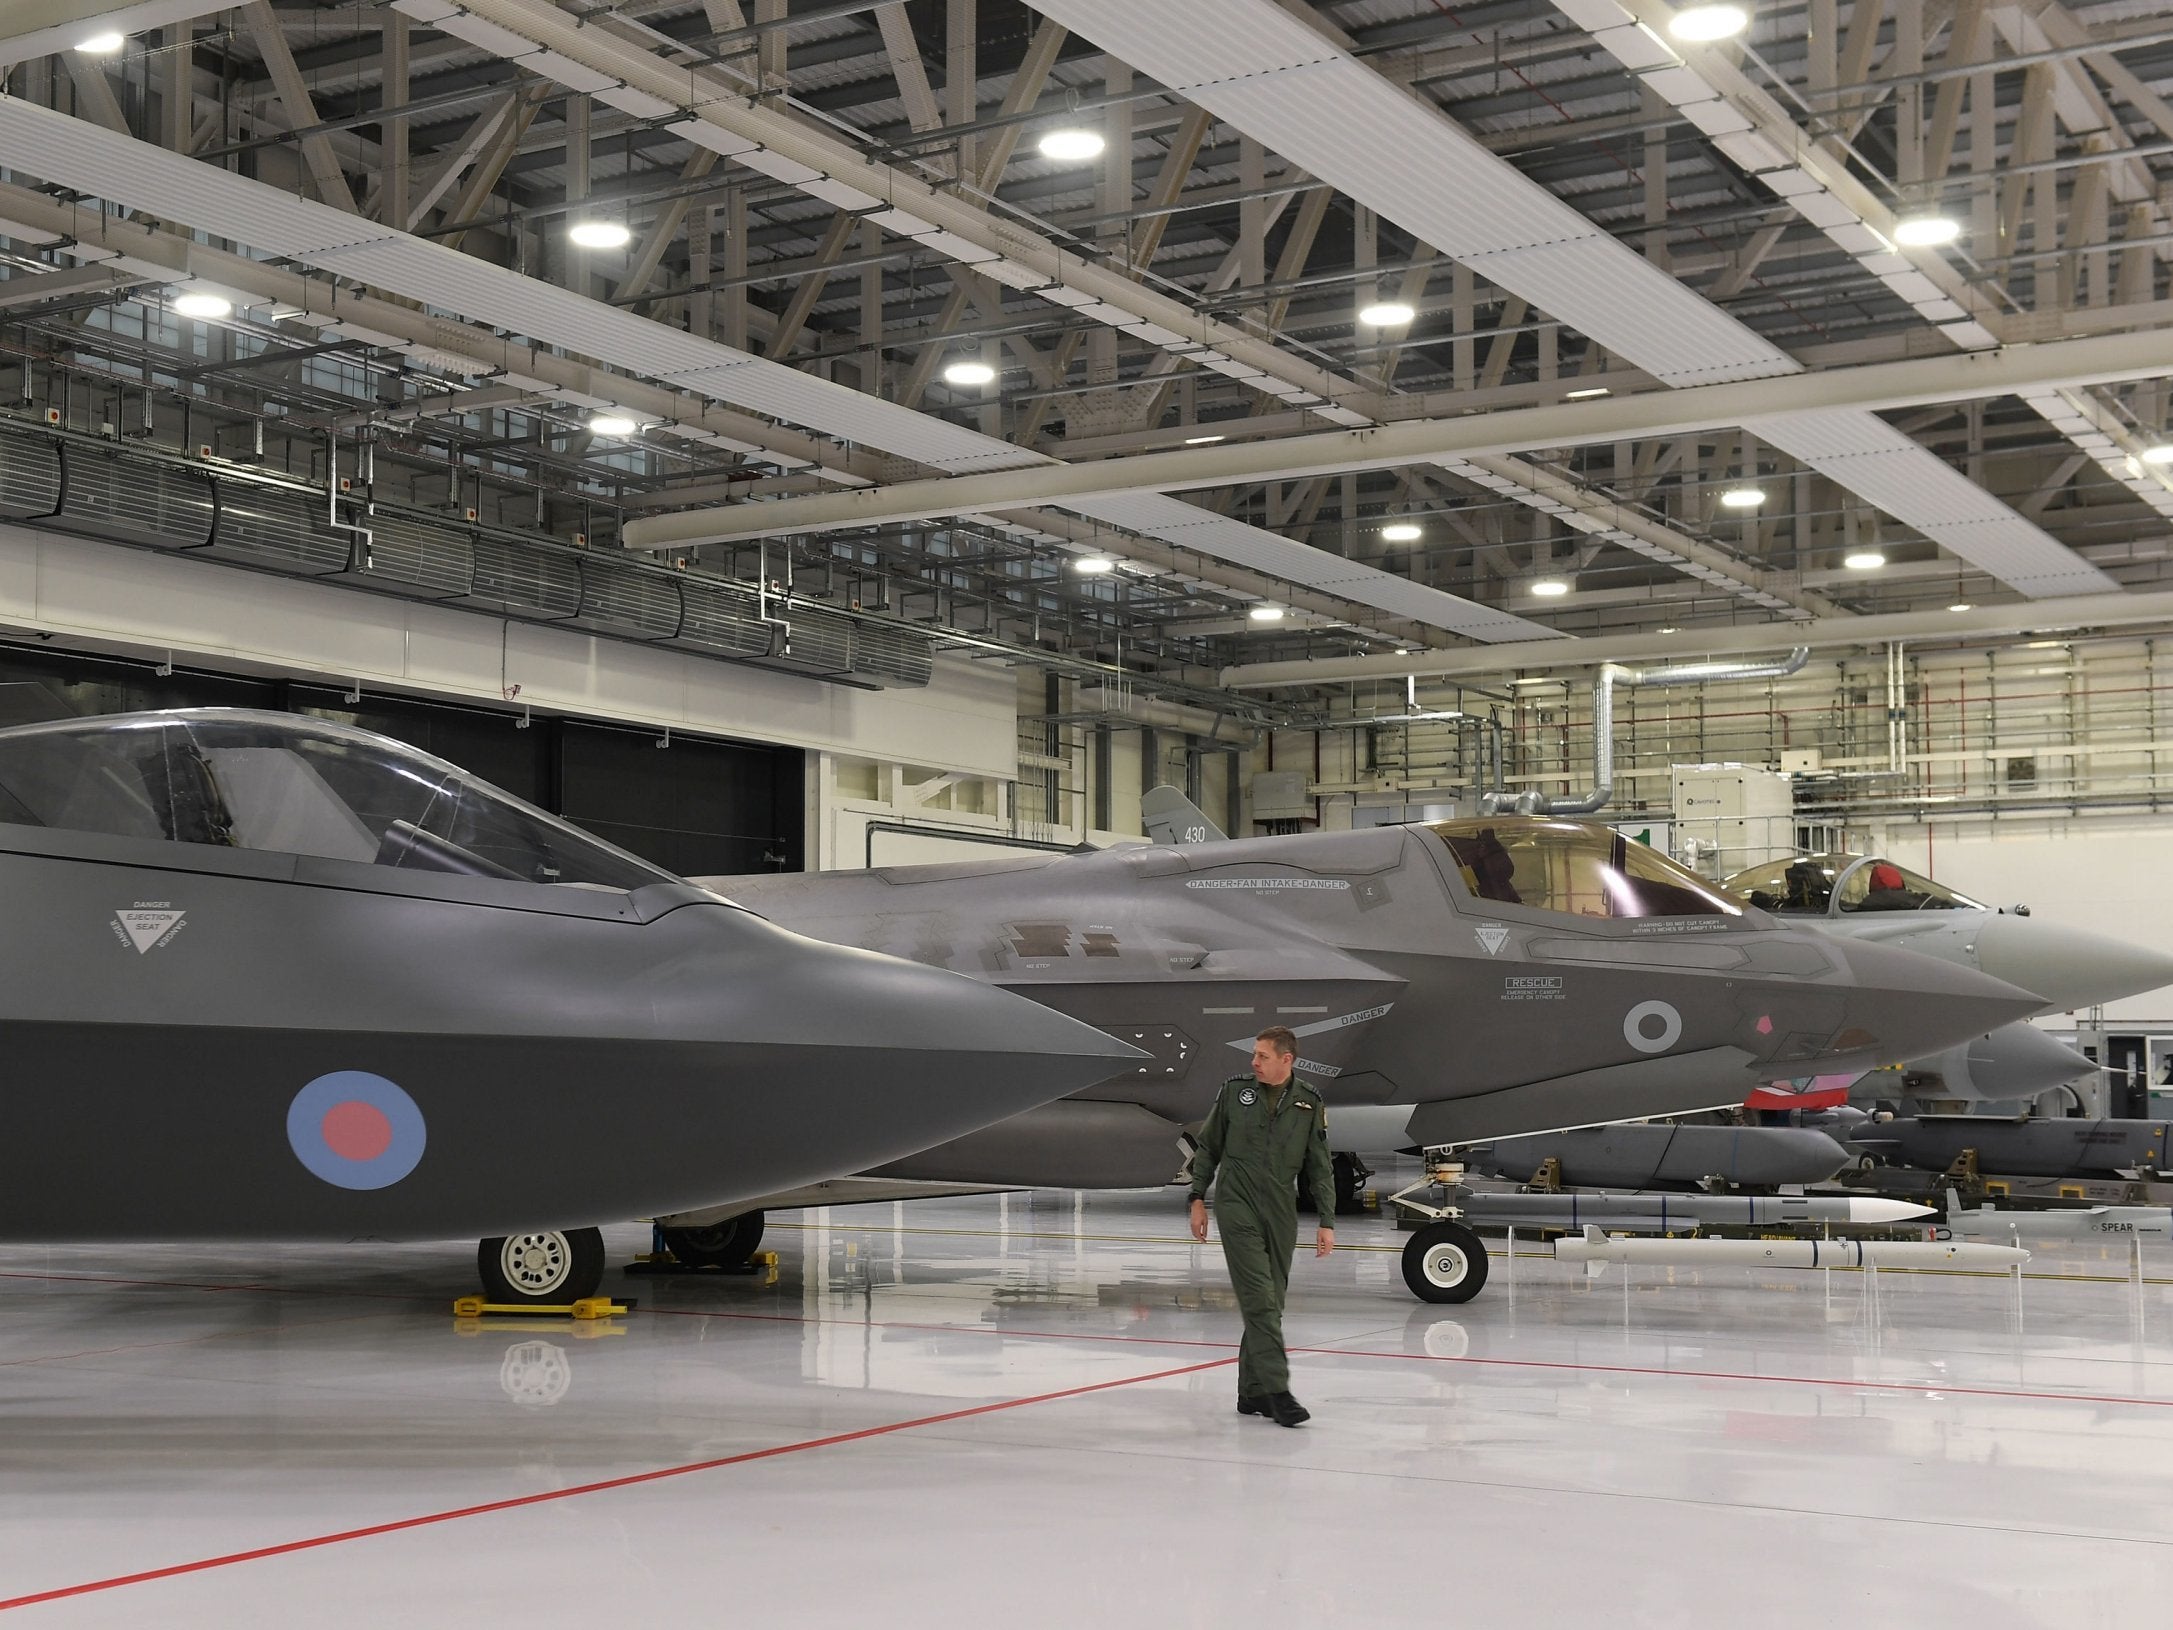 A prototype of a Tempest stealth fighter at RAF Marham